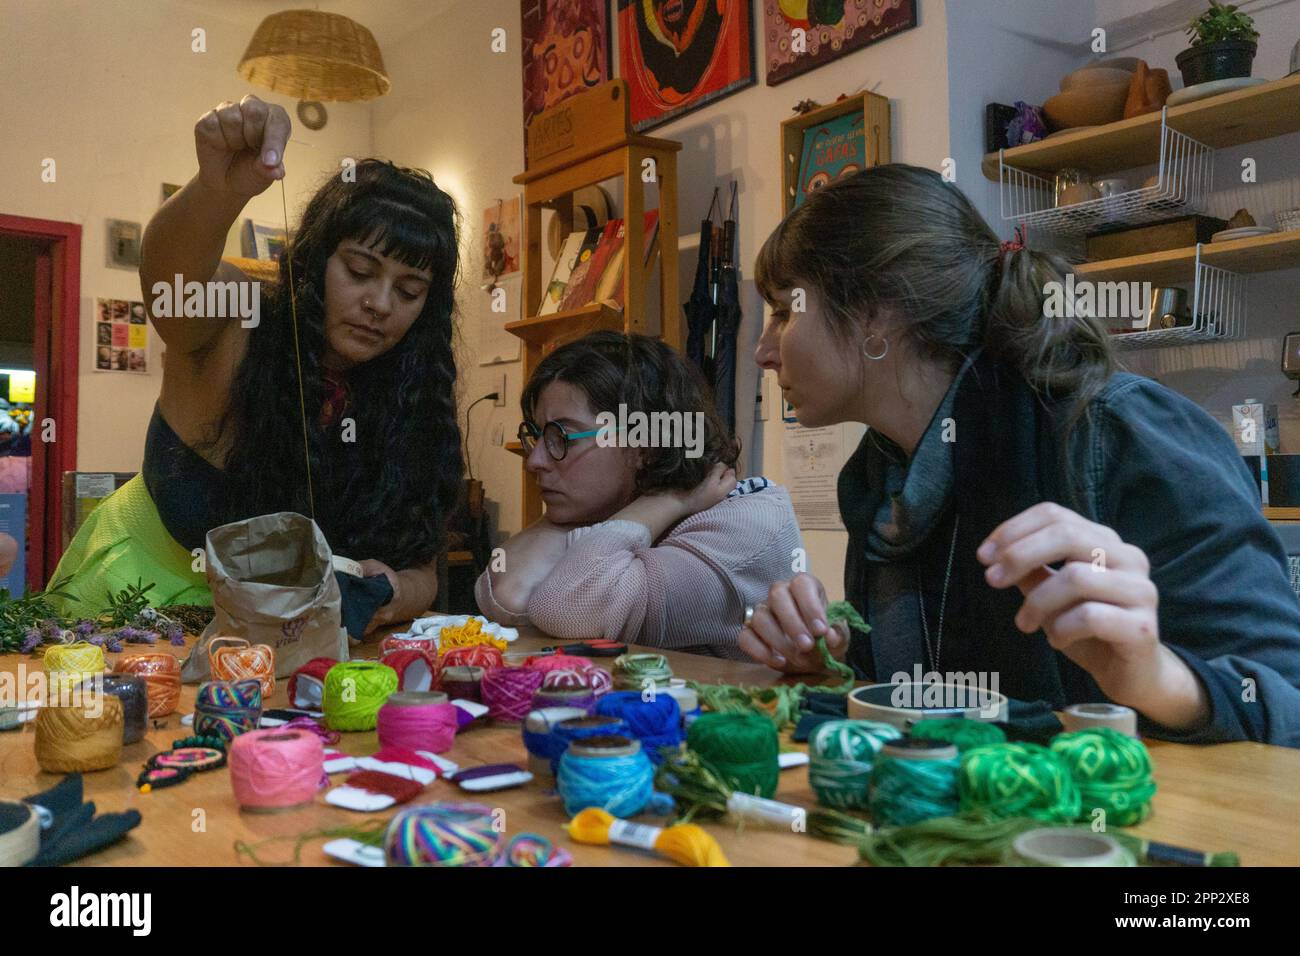 Marcela Díaz, left, teaches, from left, Josephine Donten and María Lía Idoyaga during an embroidery workshop in San Cristóbal de Las Casas, Chiapas, Mexico on Nov. 4, 2022. Díaz uses techniques she learned from Mayan women and her own knowledge to make handicrafts. (Marissa Revilla/Global Press Journal) Stock Photo